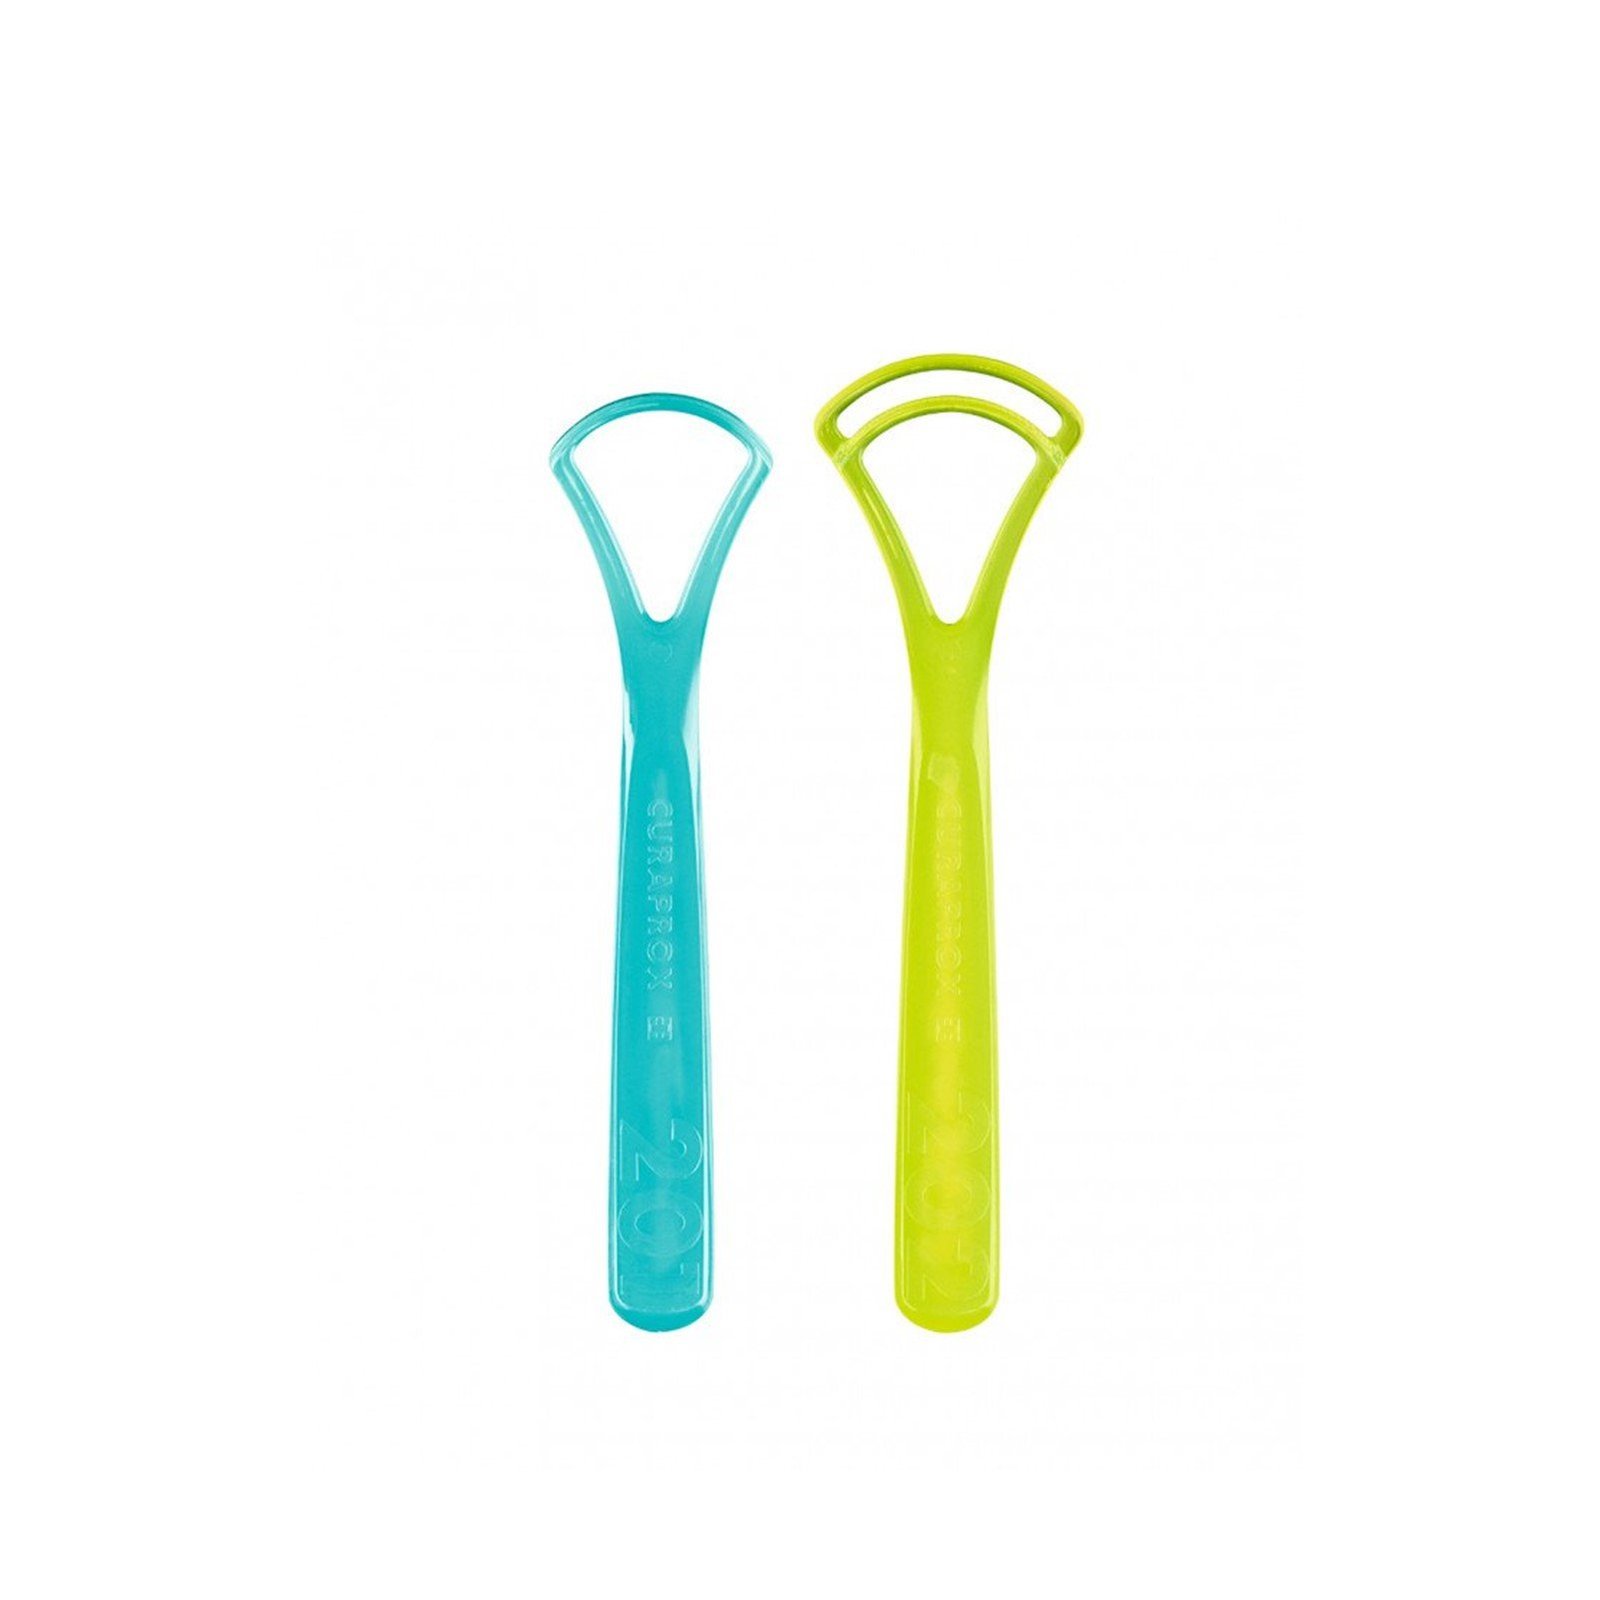 Curaprox Tongue Cleaner Duo Pack